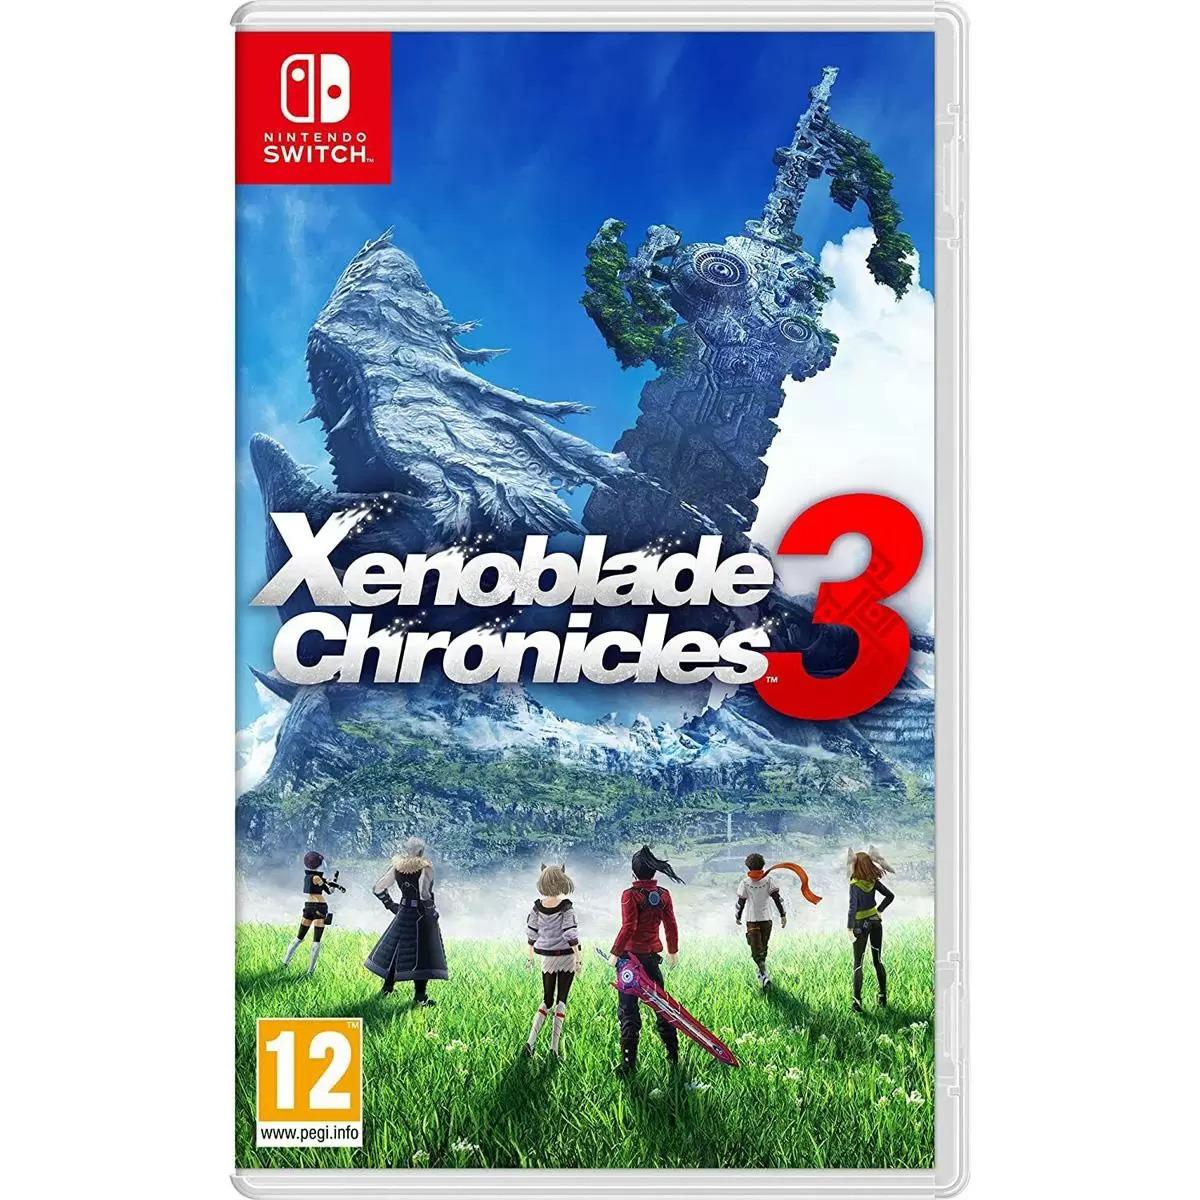 Xenoblade Chronicles 3 Nintendo Switch for $44 Shipped